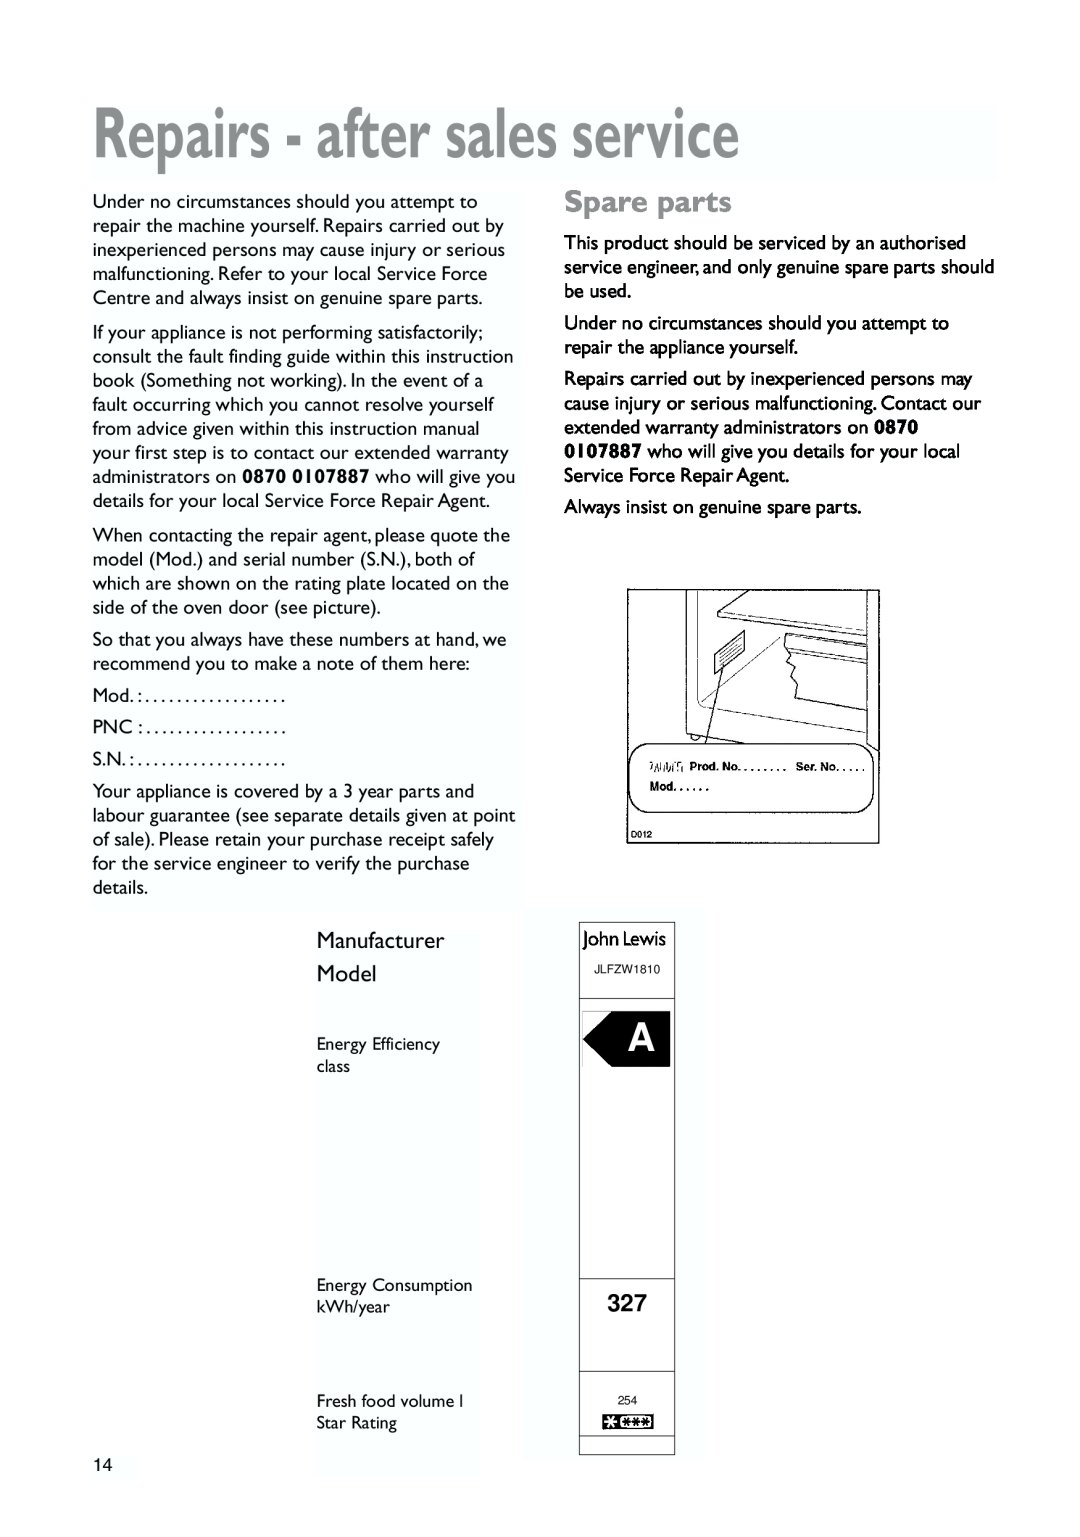 John Lewis JLFZW1810 instruction manual Repairs - after sales service, Spare parts, Manufacturer Model 